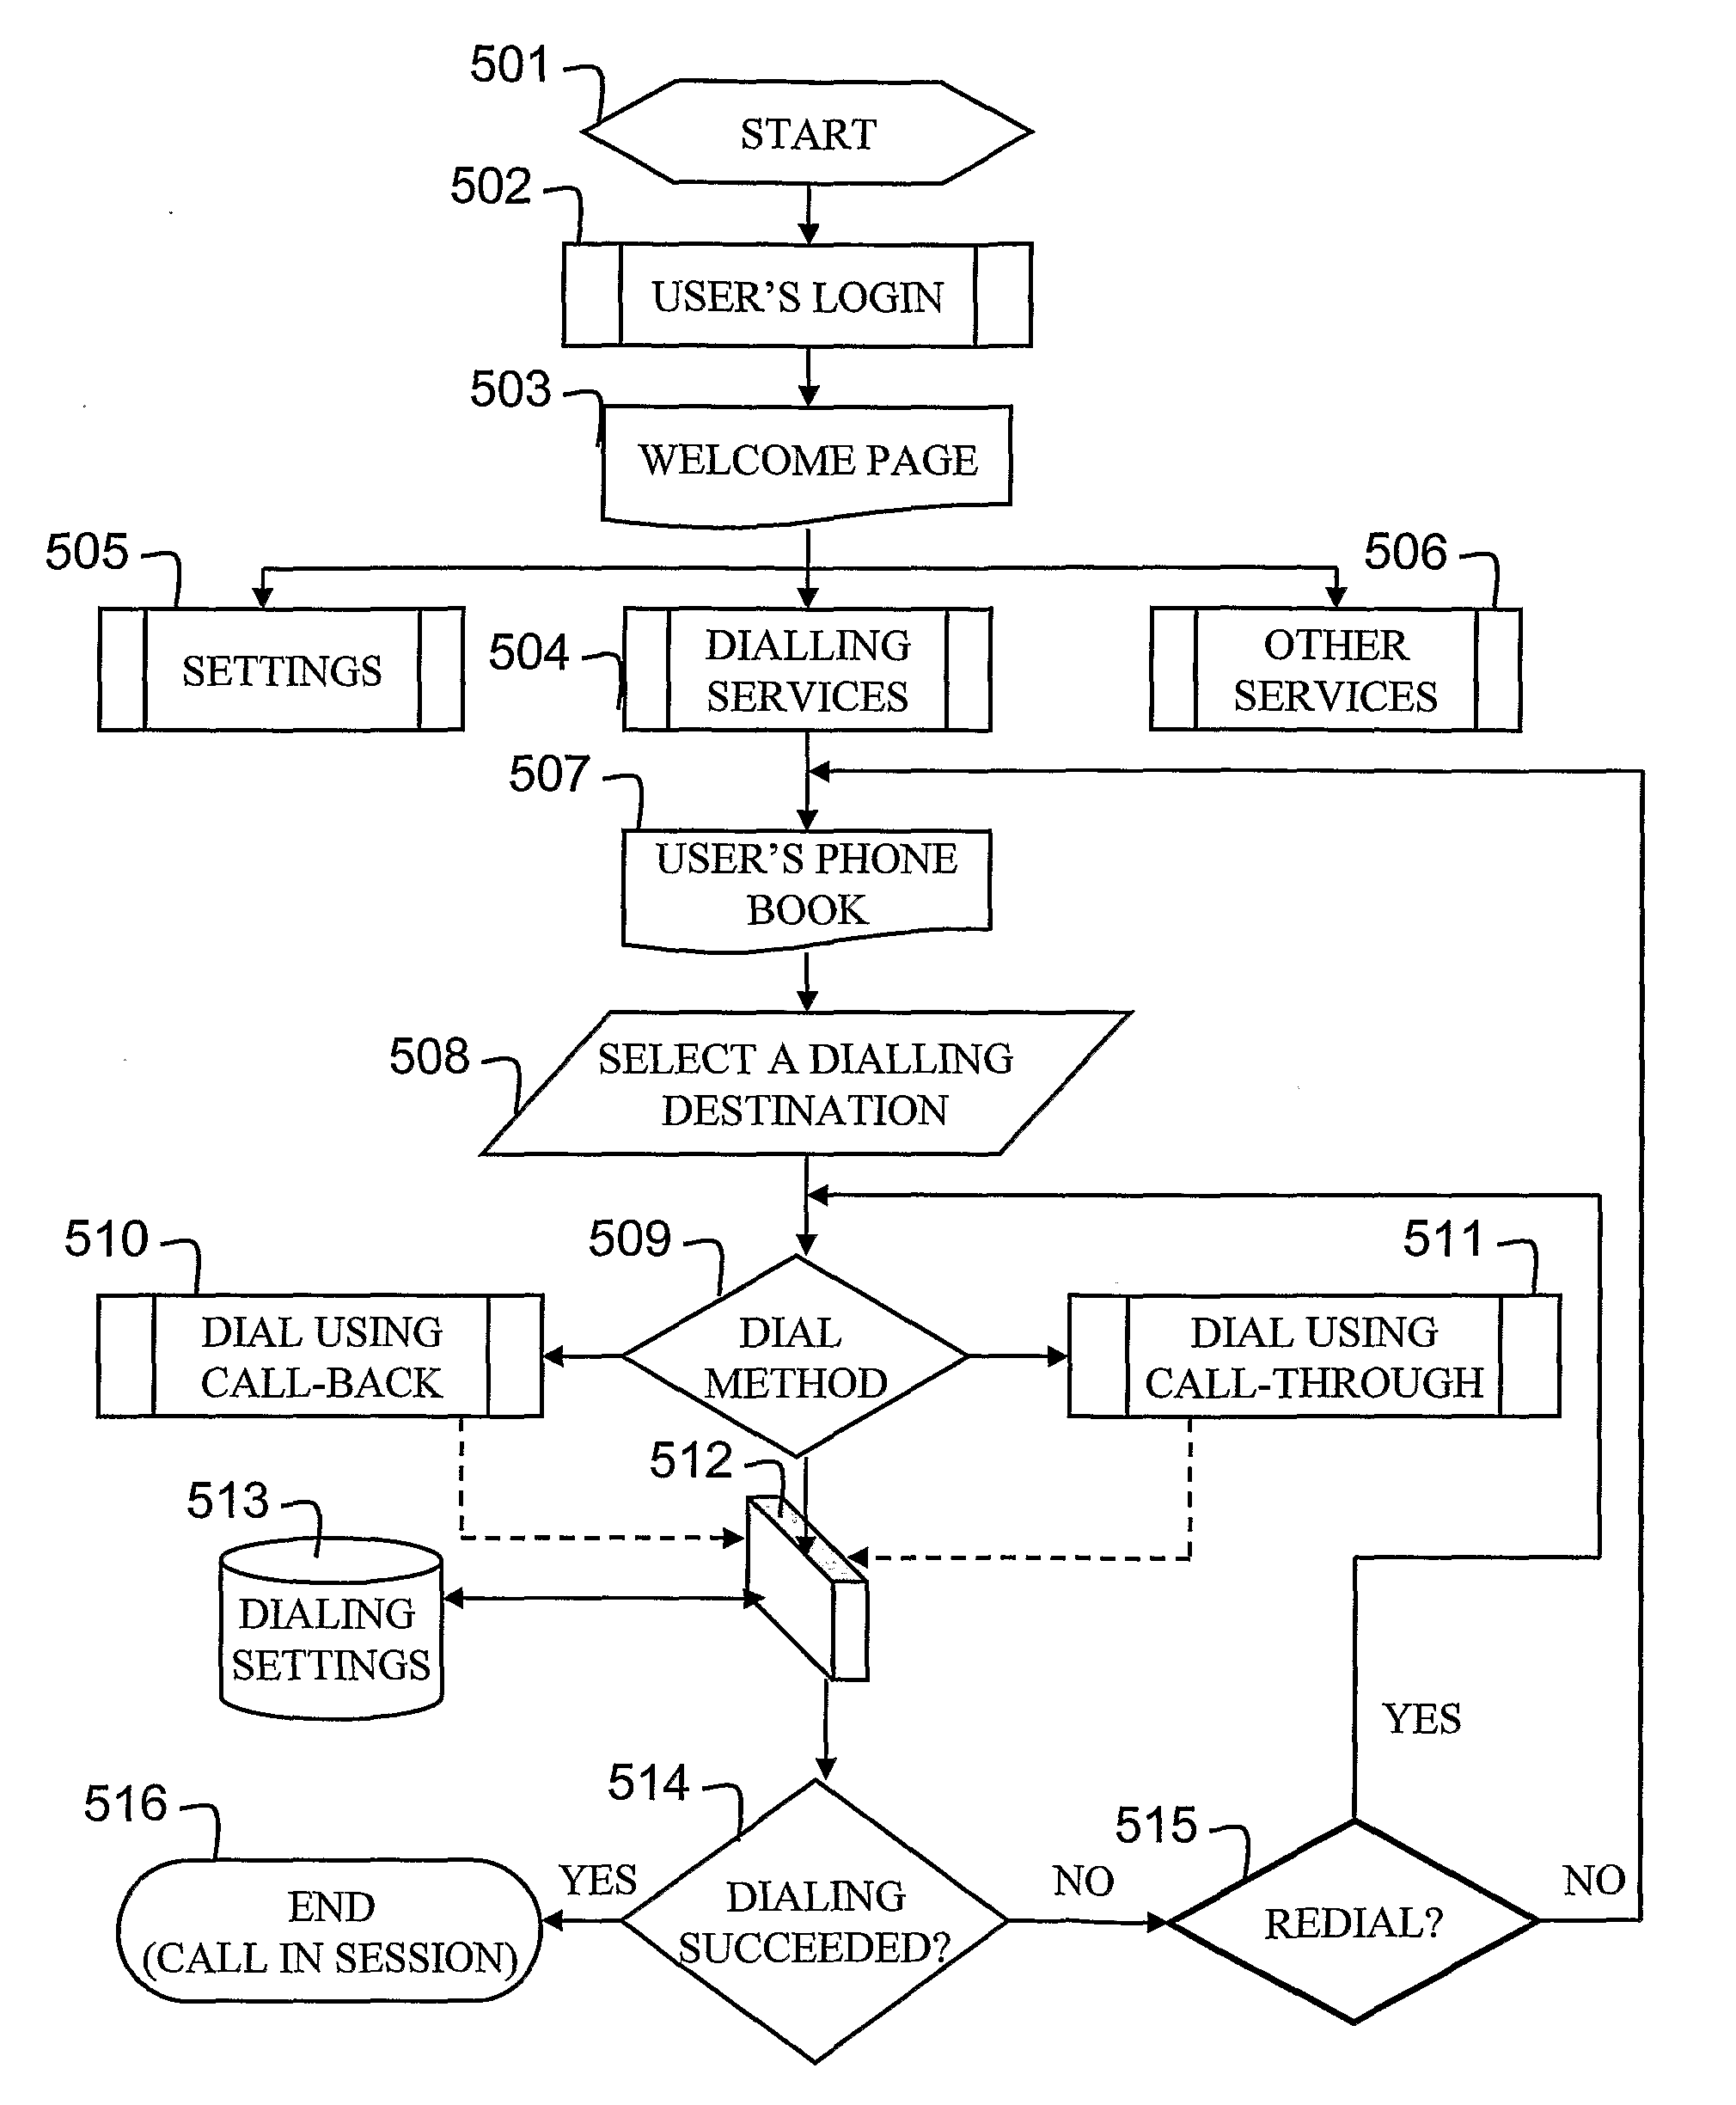 Method and system for efficient call initiation in internet-based mobile telephony systems